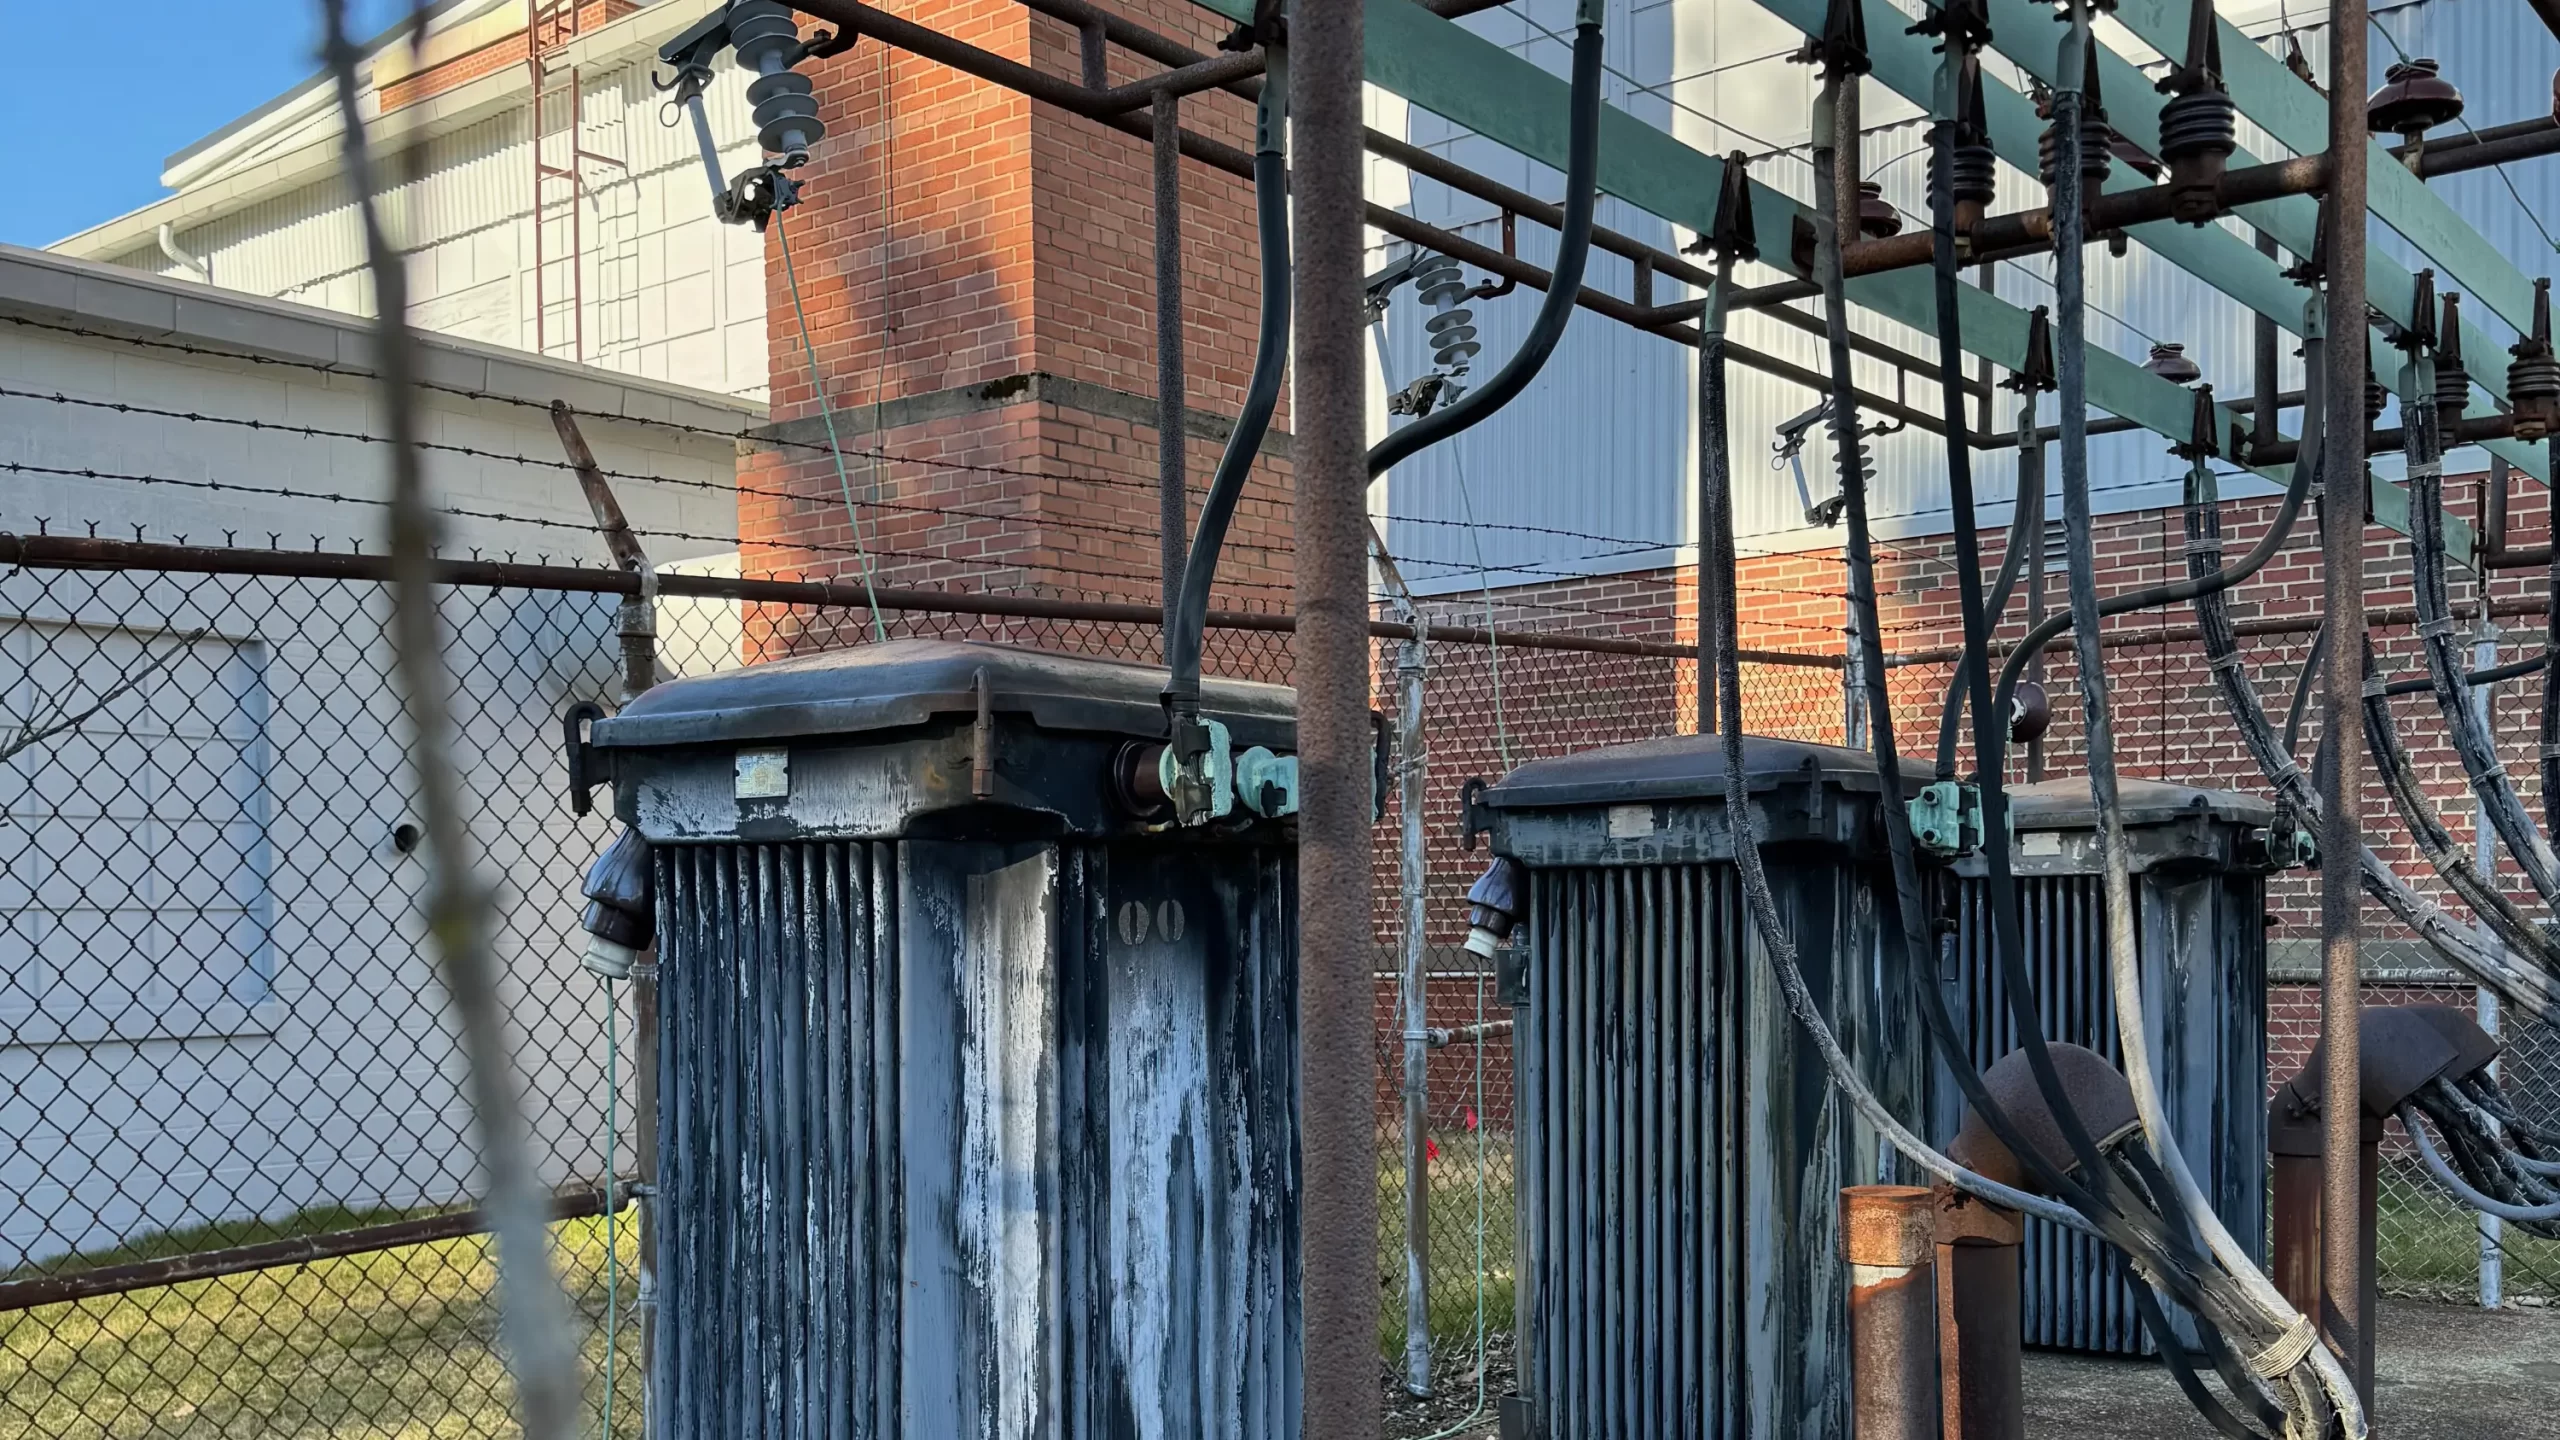 This image of burnt electrical transformers is meant to convey the issues facing CMOs in today's hyper-competitive and commoditized media ecosystem.